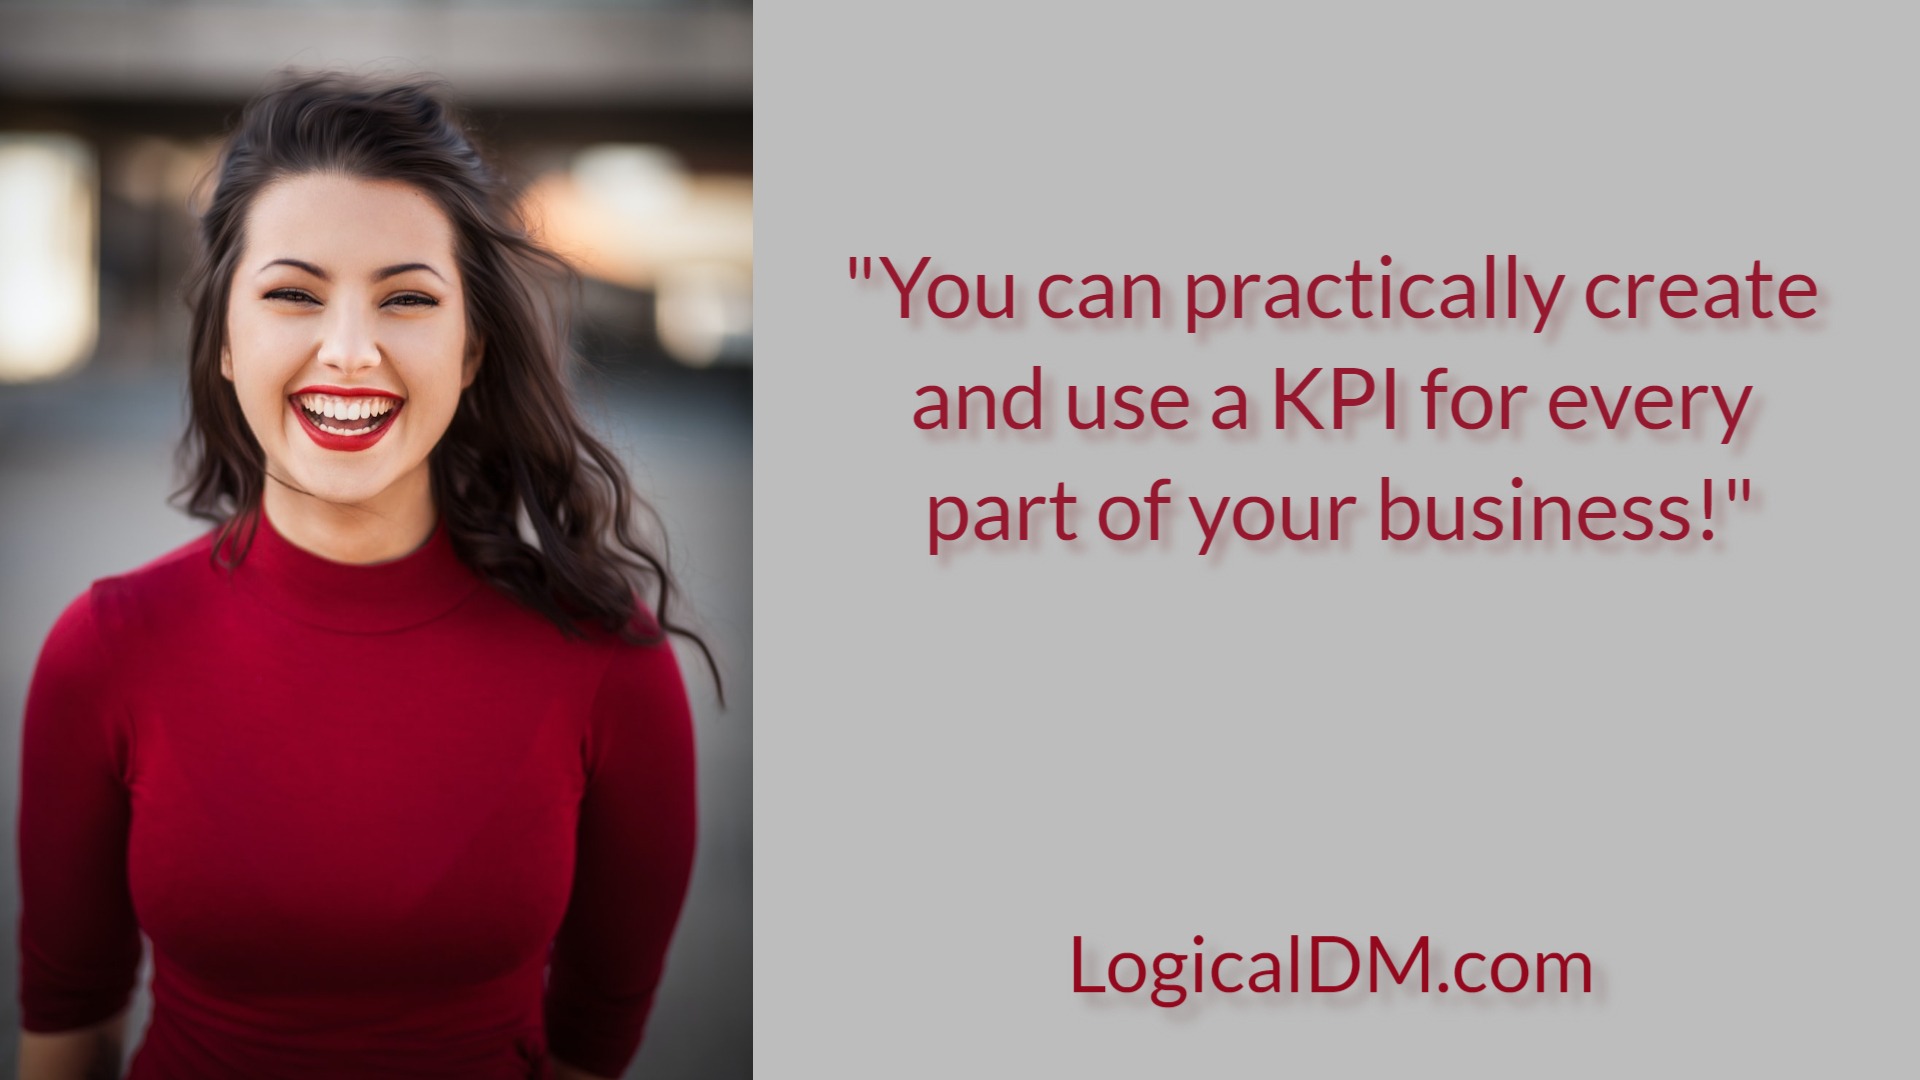 Young female adult in red laughing about KPI quote